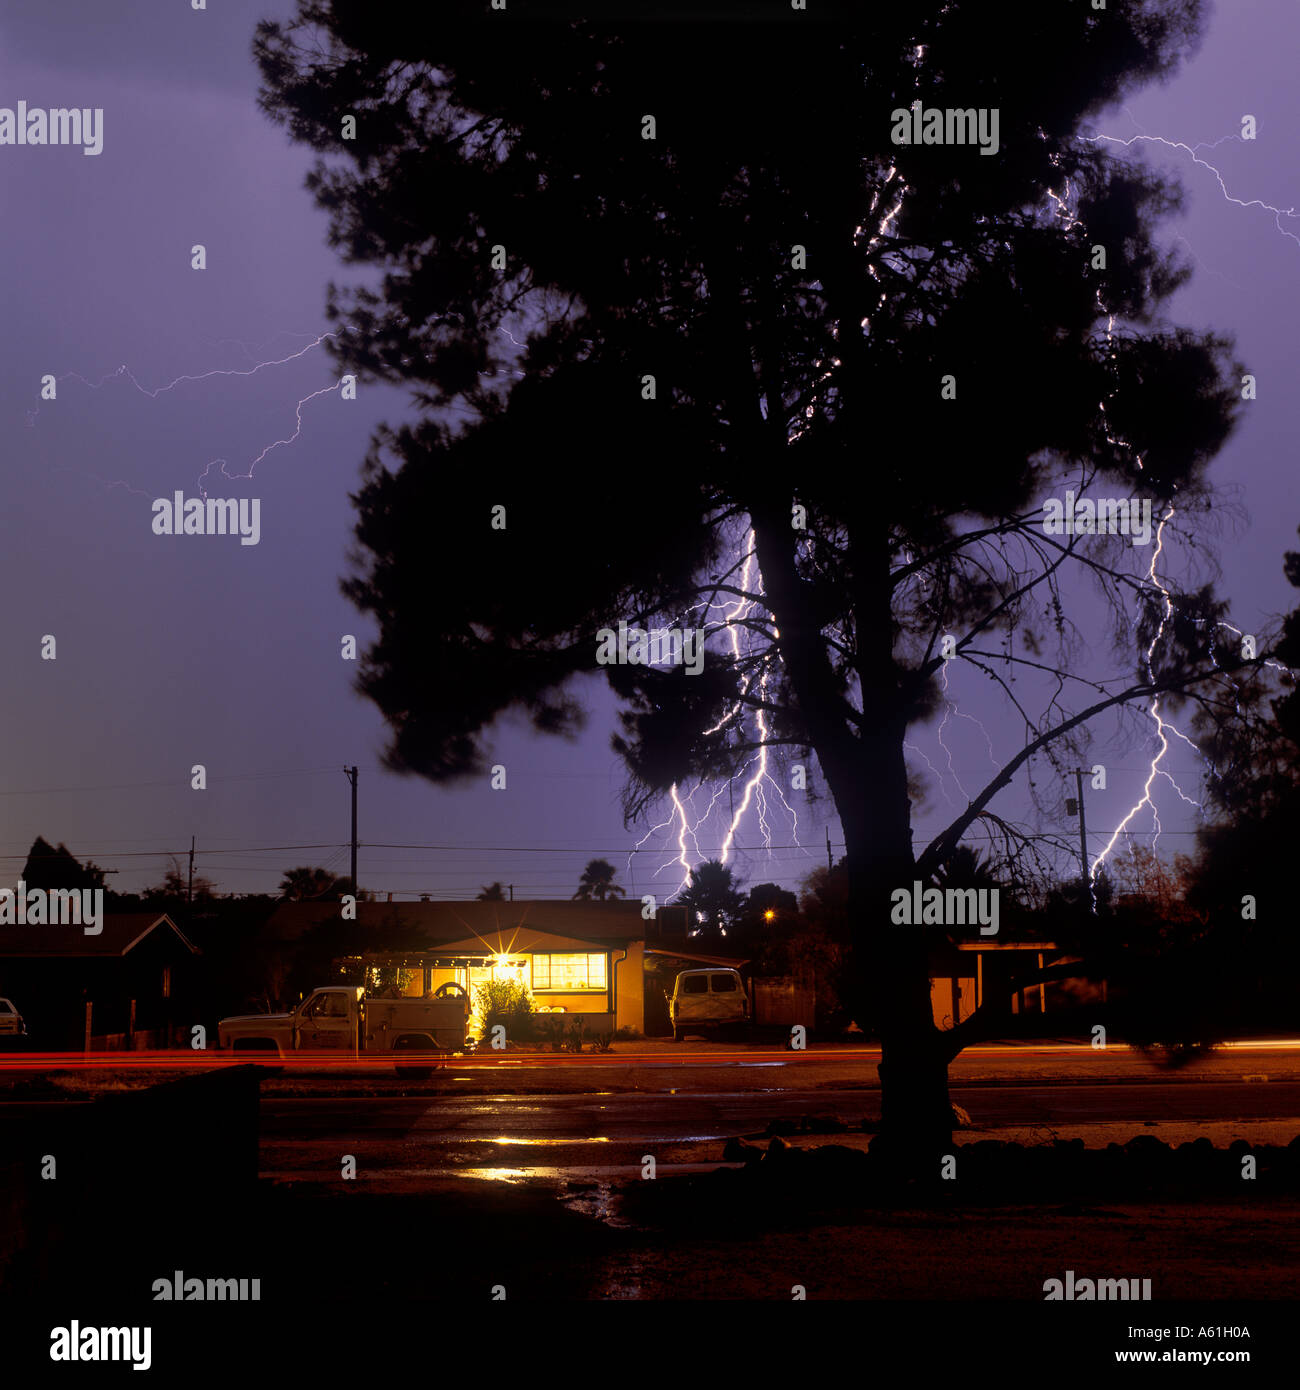 Lightning strikes behind a house in a neighborhood in Tucson, Arizona, USA. A tree is silhouetted in the foreground. Stock Photo